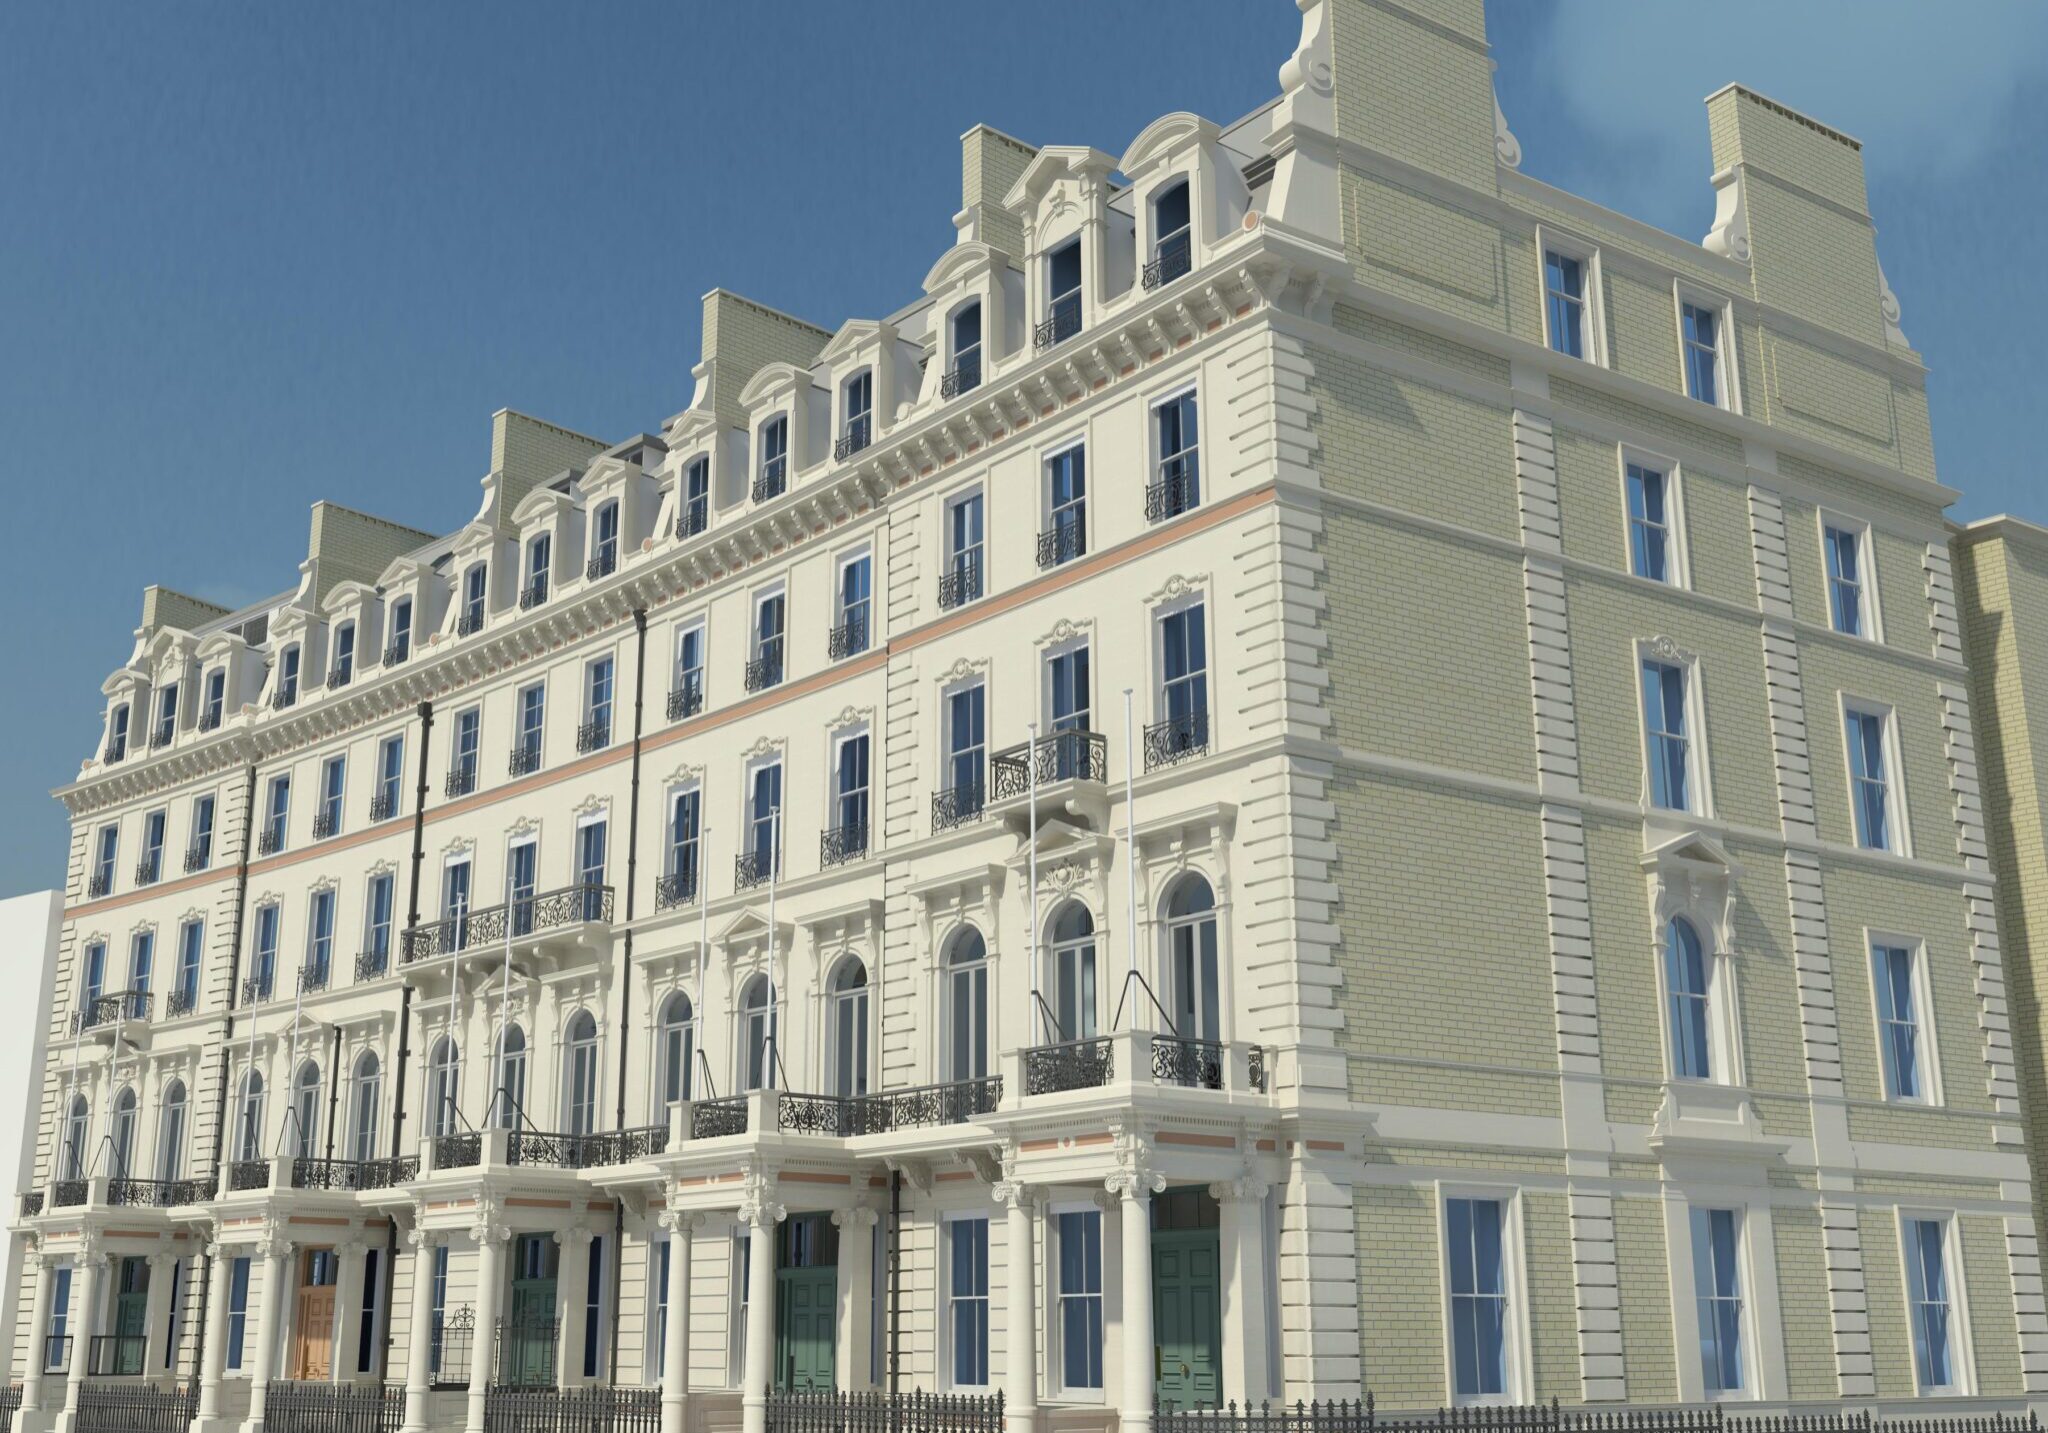 3d model of a listed building in Belgravia